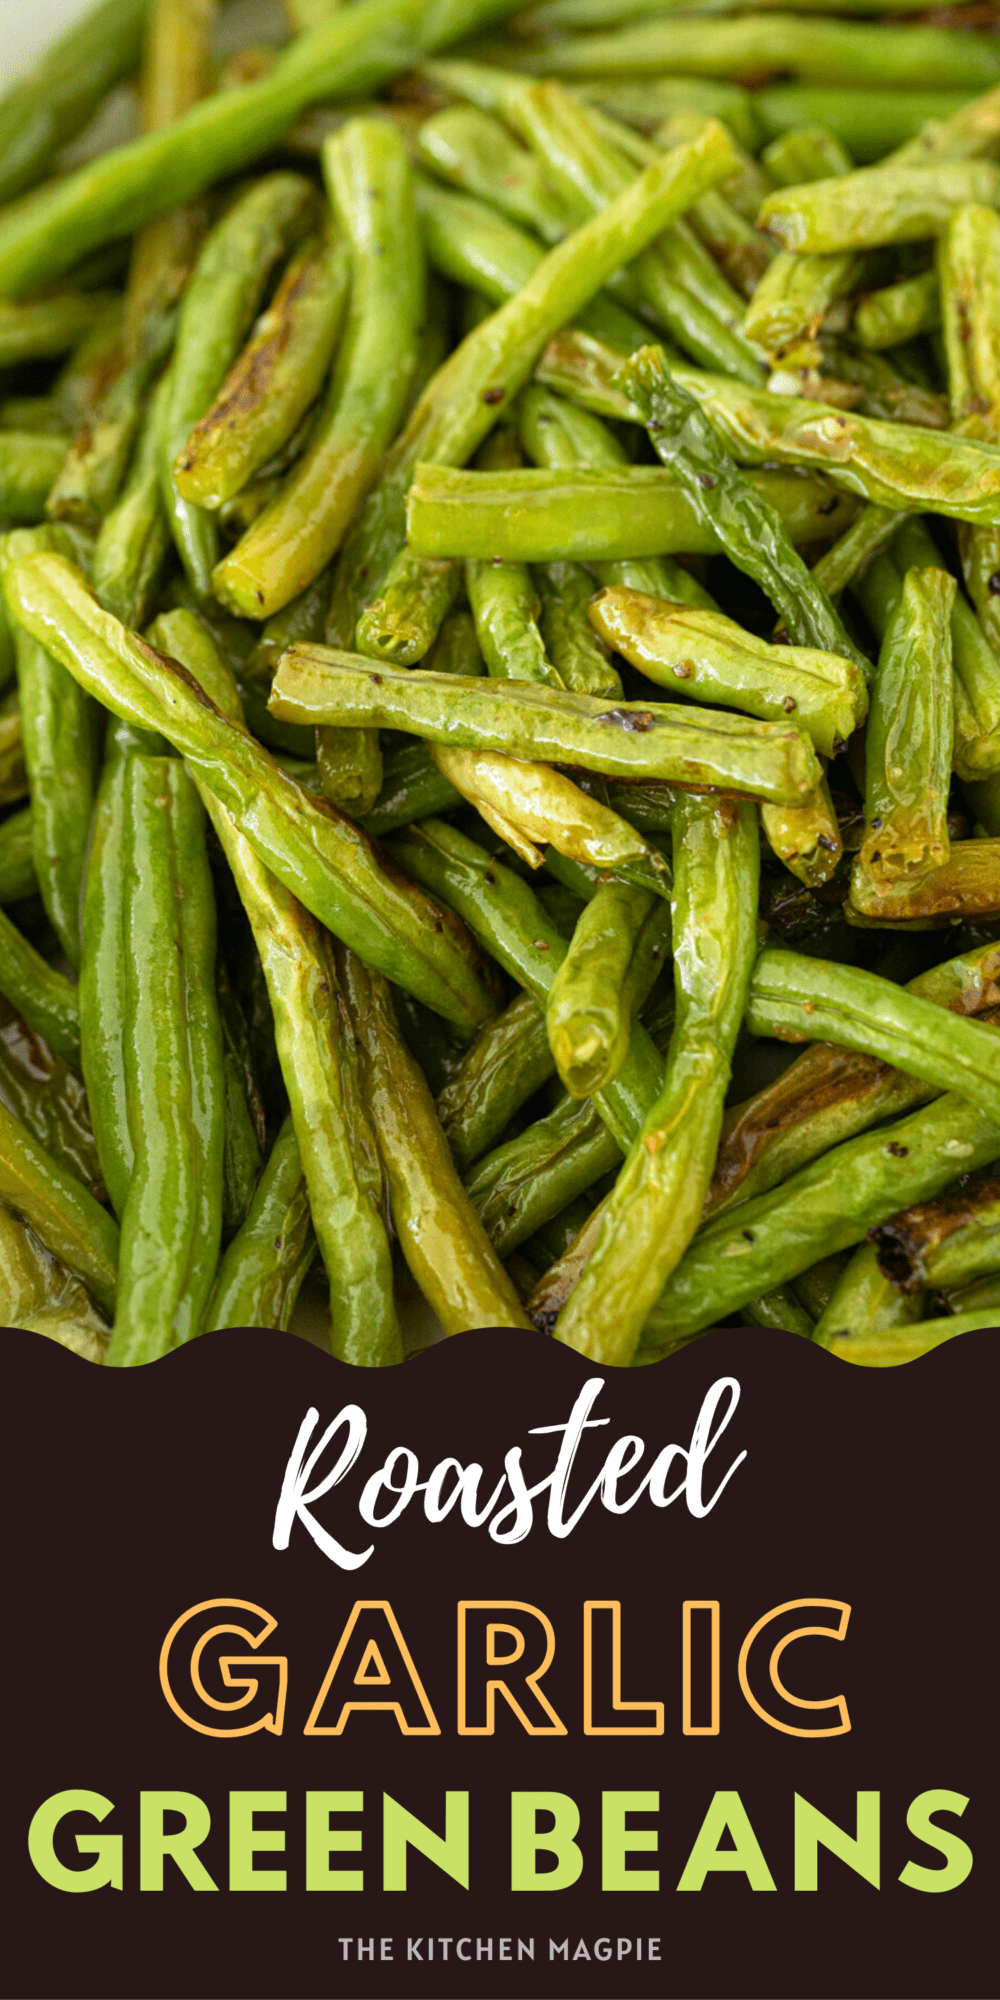 This fast and simple recipe for roasted green beans with garlic is uncomplicated yet still delicious and tender, a perfect way to add some greens to your meal.